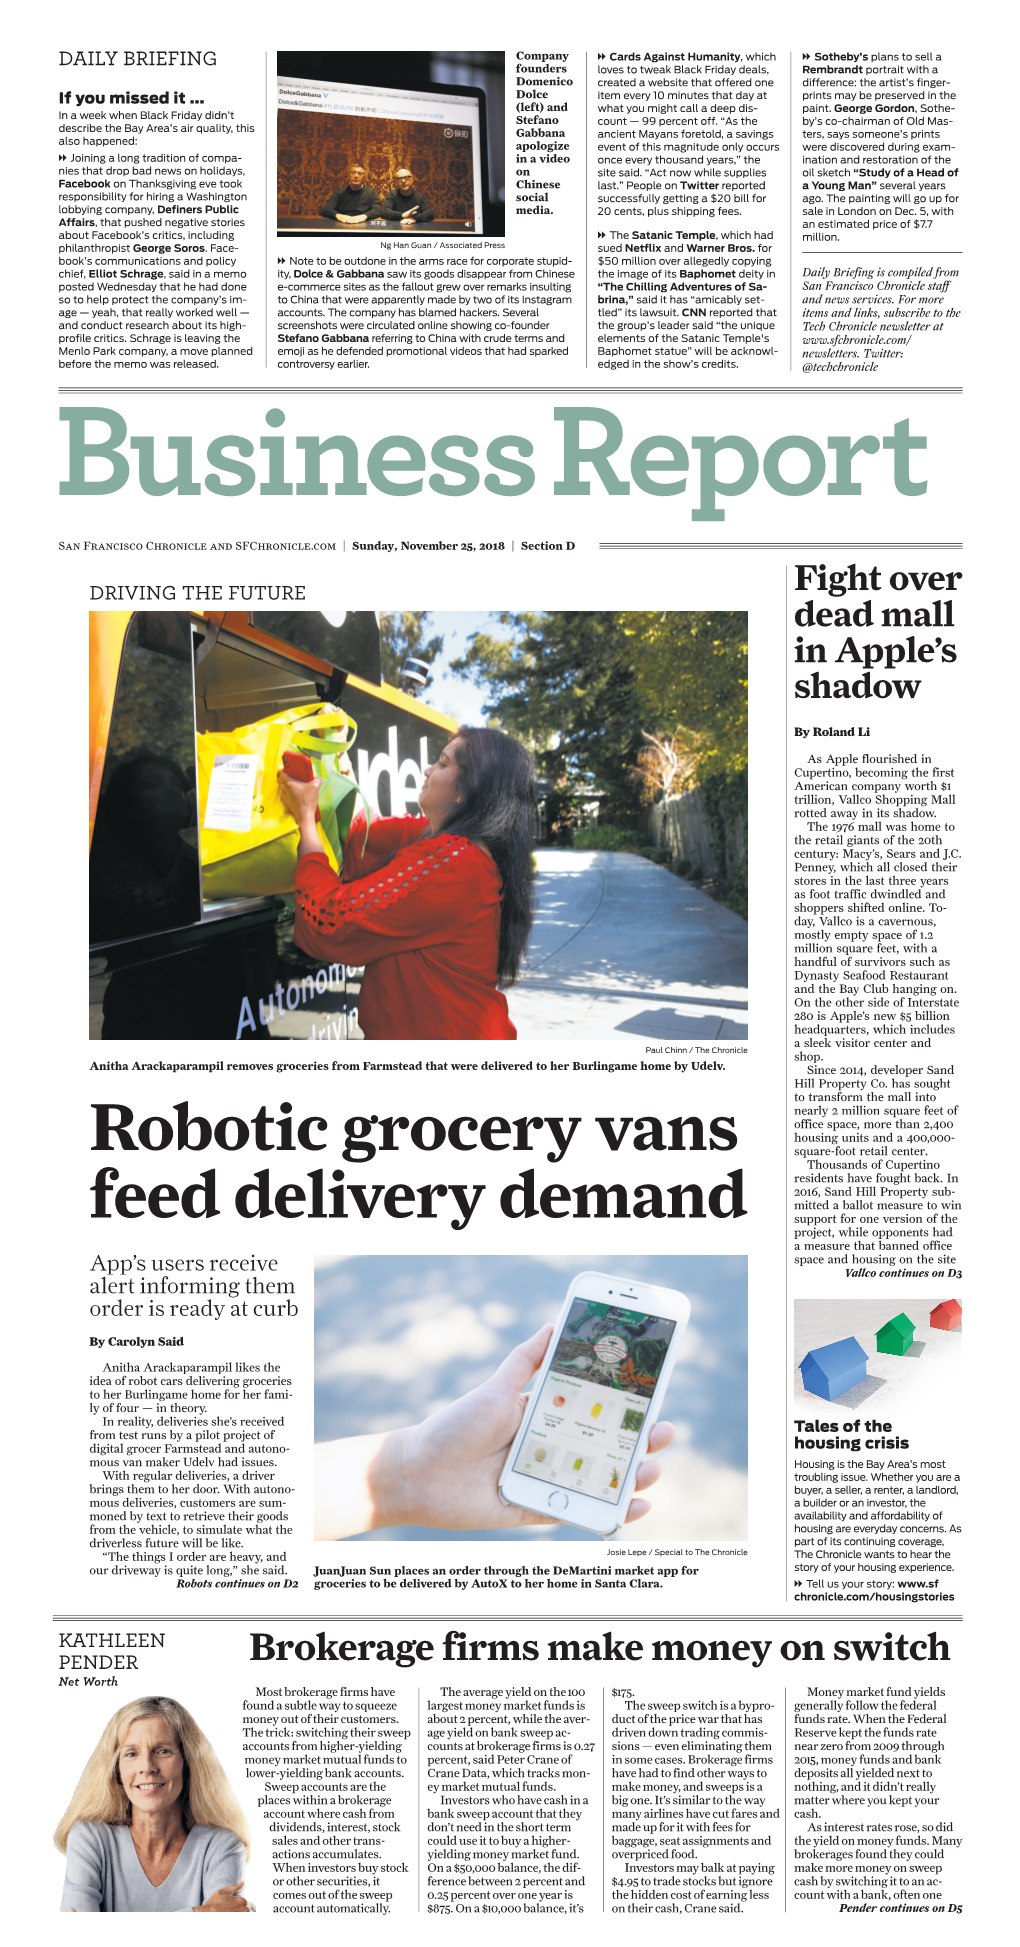 Robotic Grocery Vans Feed Delivery Demand